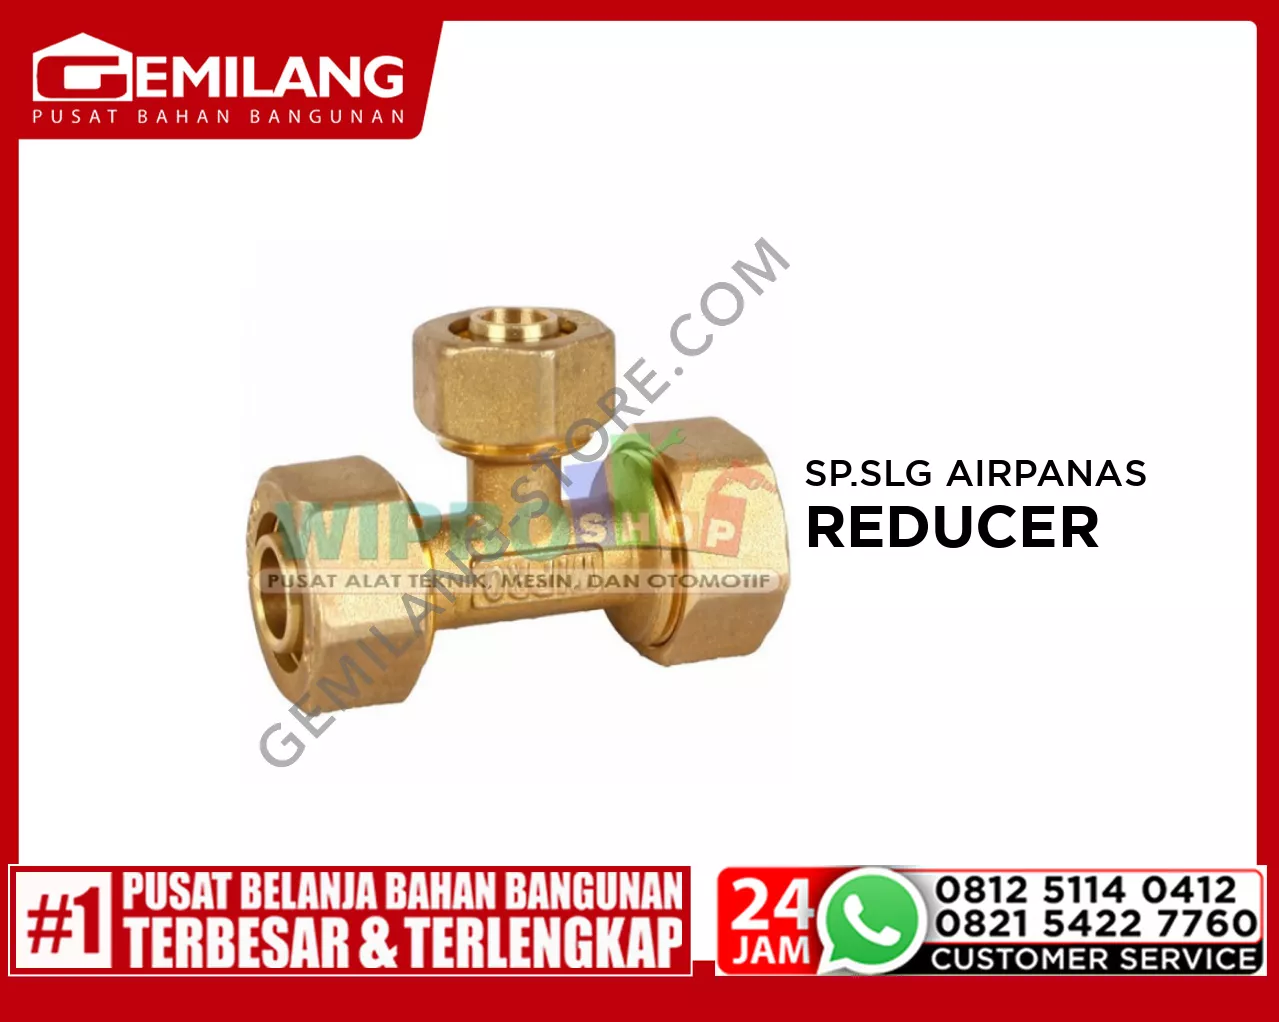 WIPRO SP.SLG AIR PANAS REDUCER T-1418-1216-1418